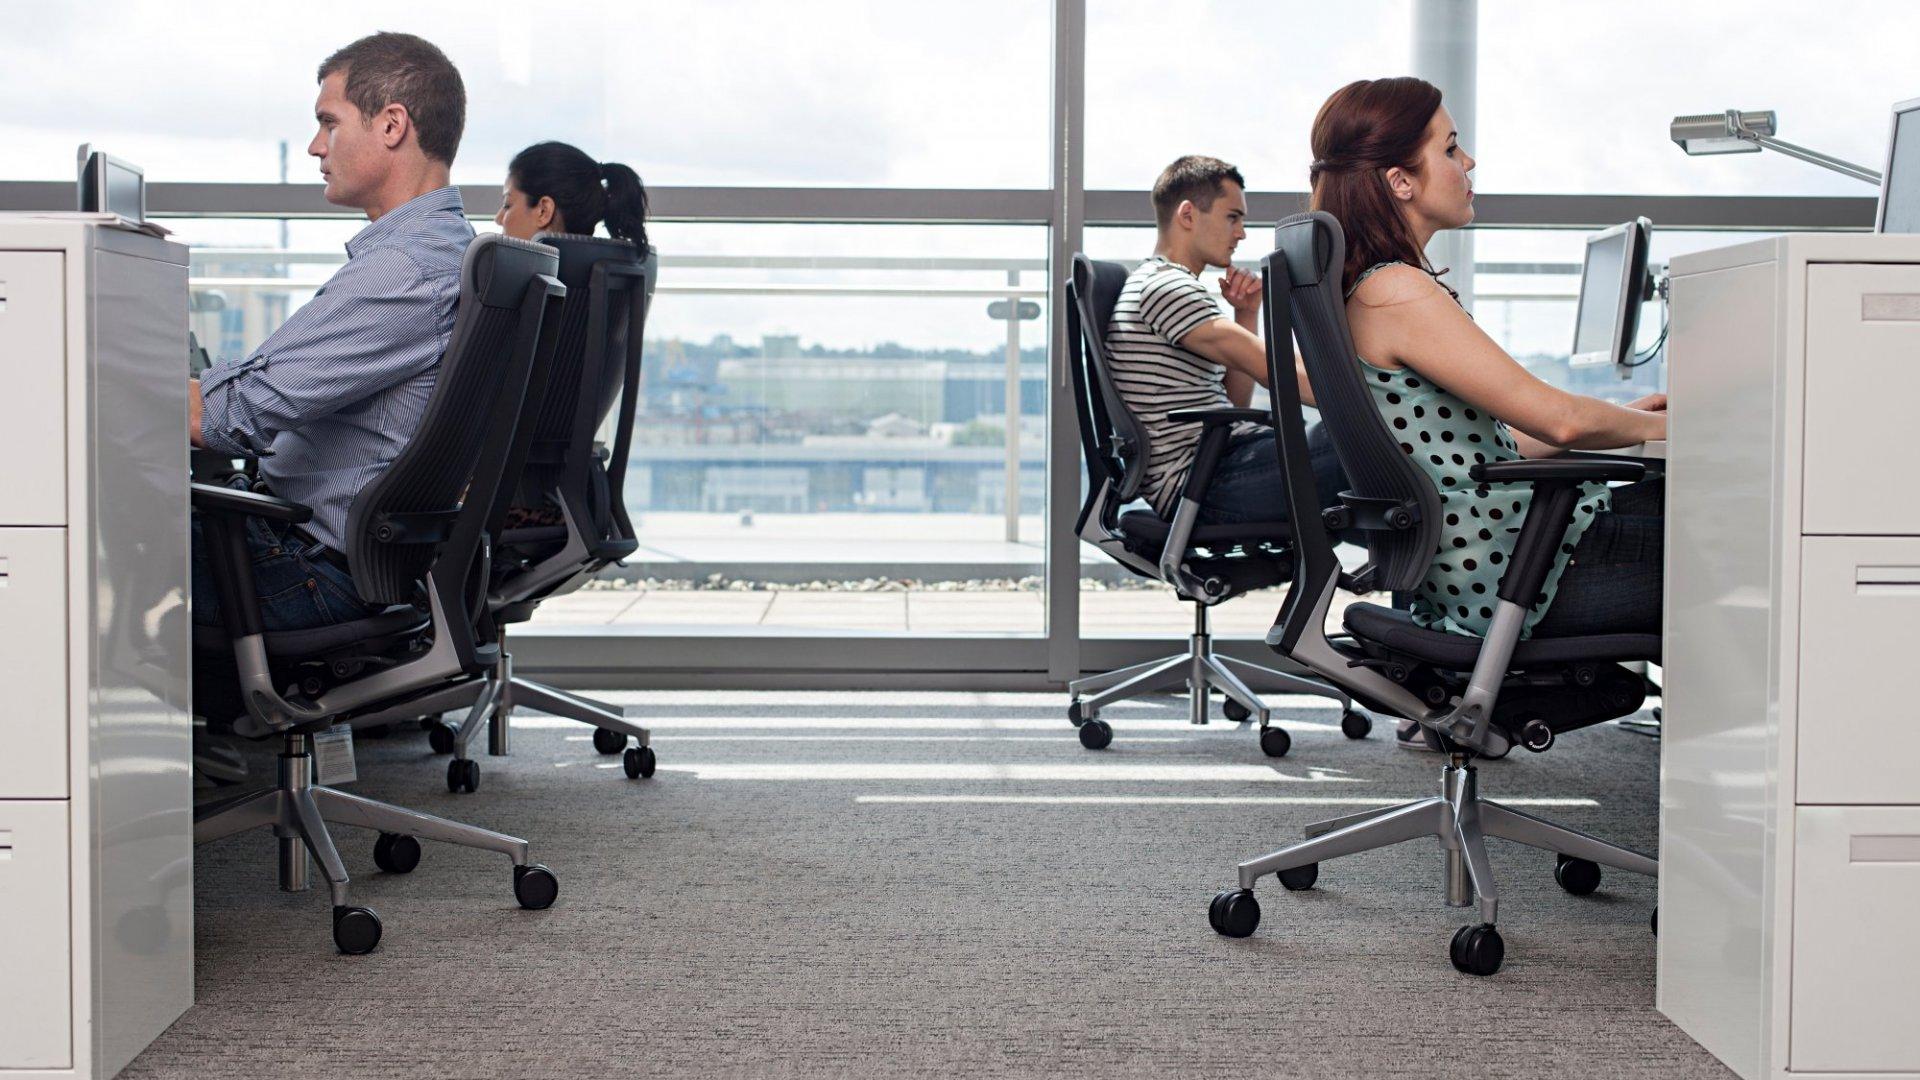 People sitting in an office